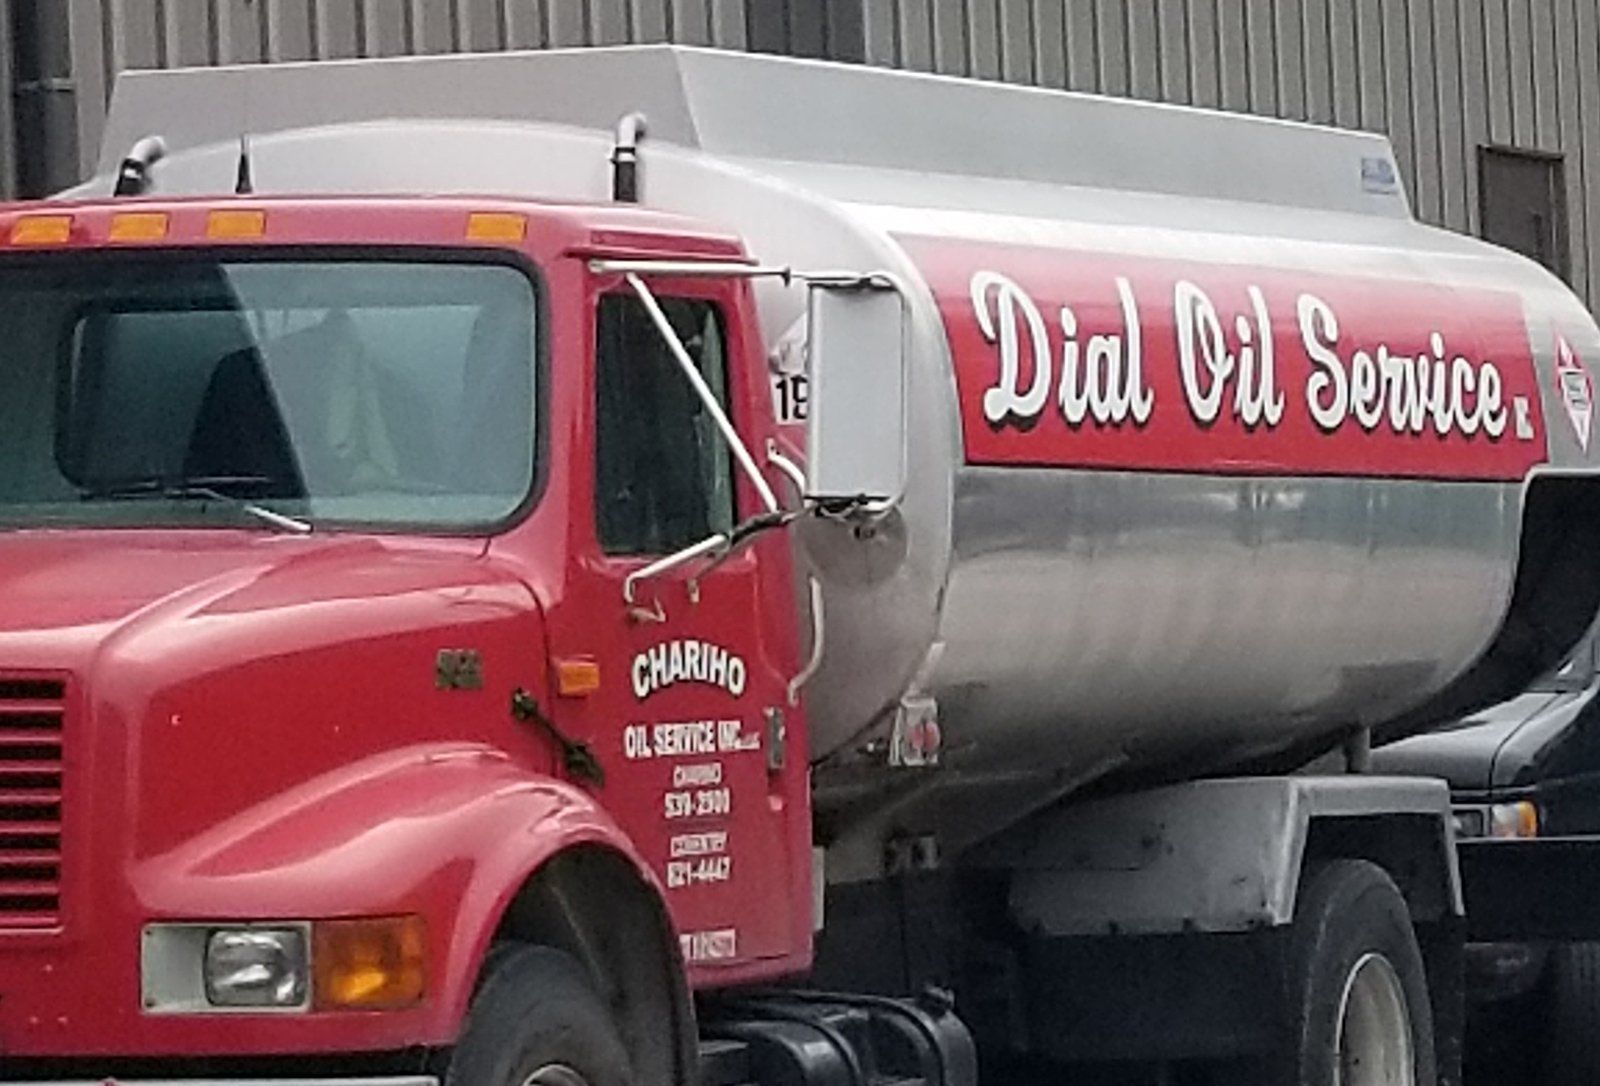 Dial Oil Service South Inc truck